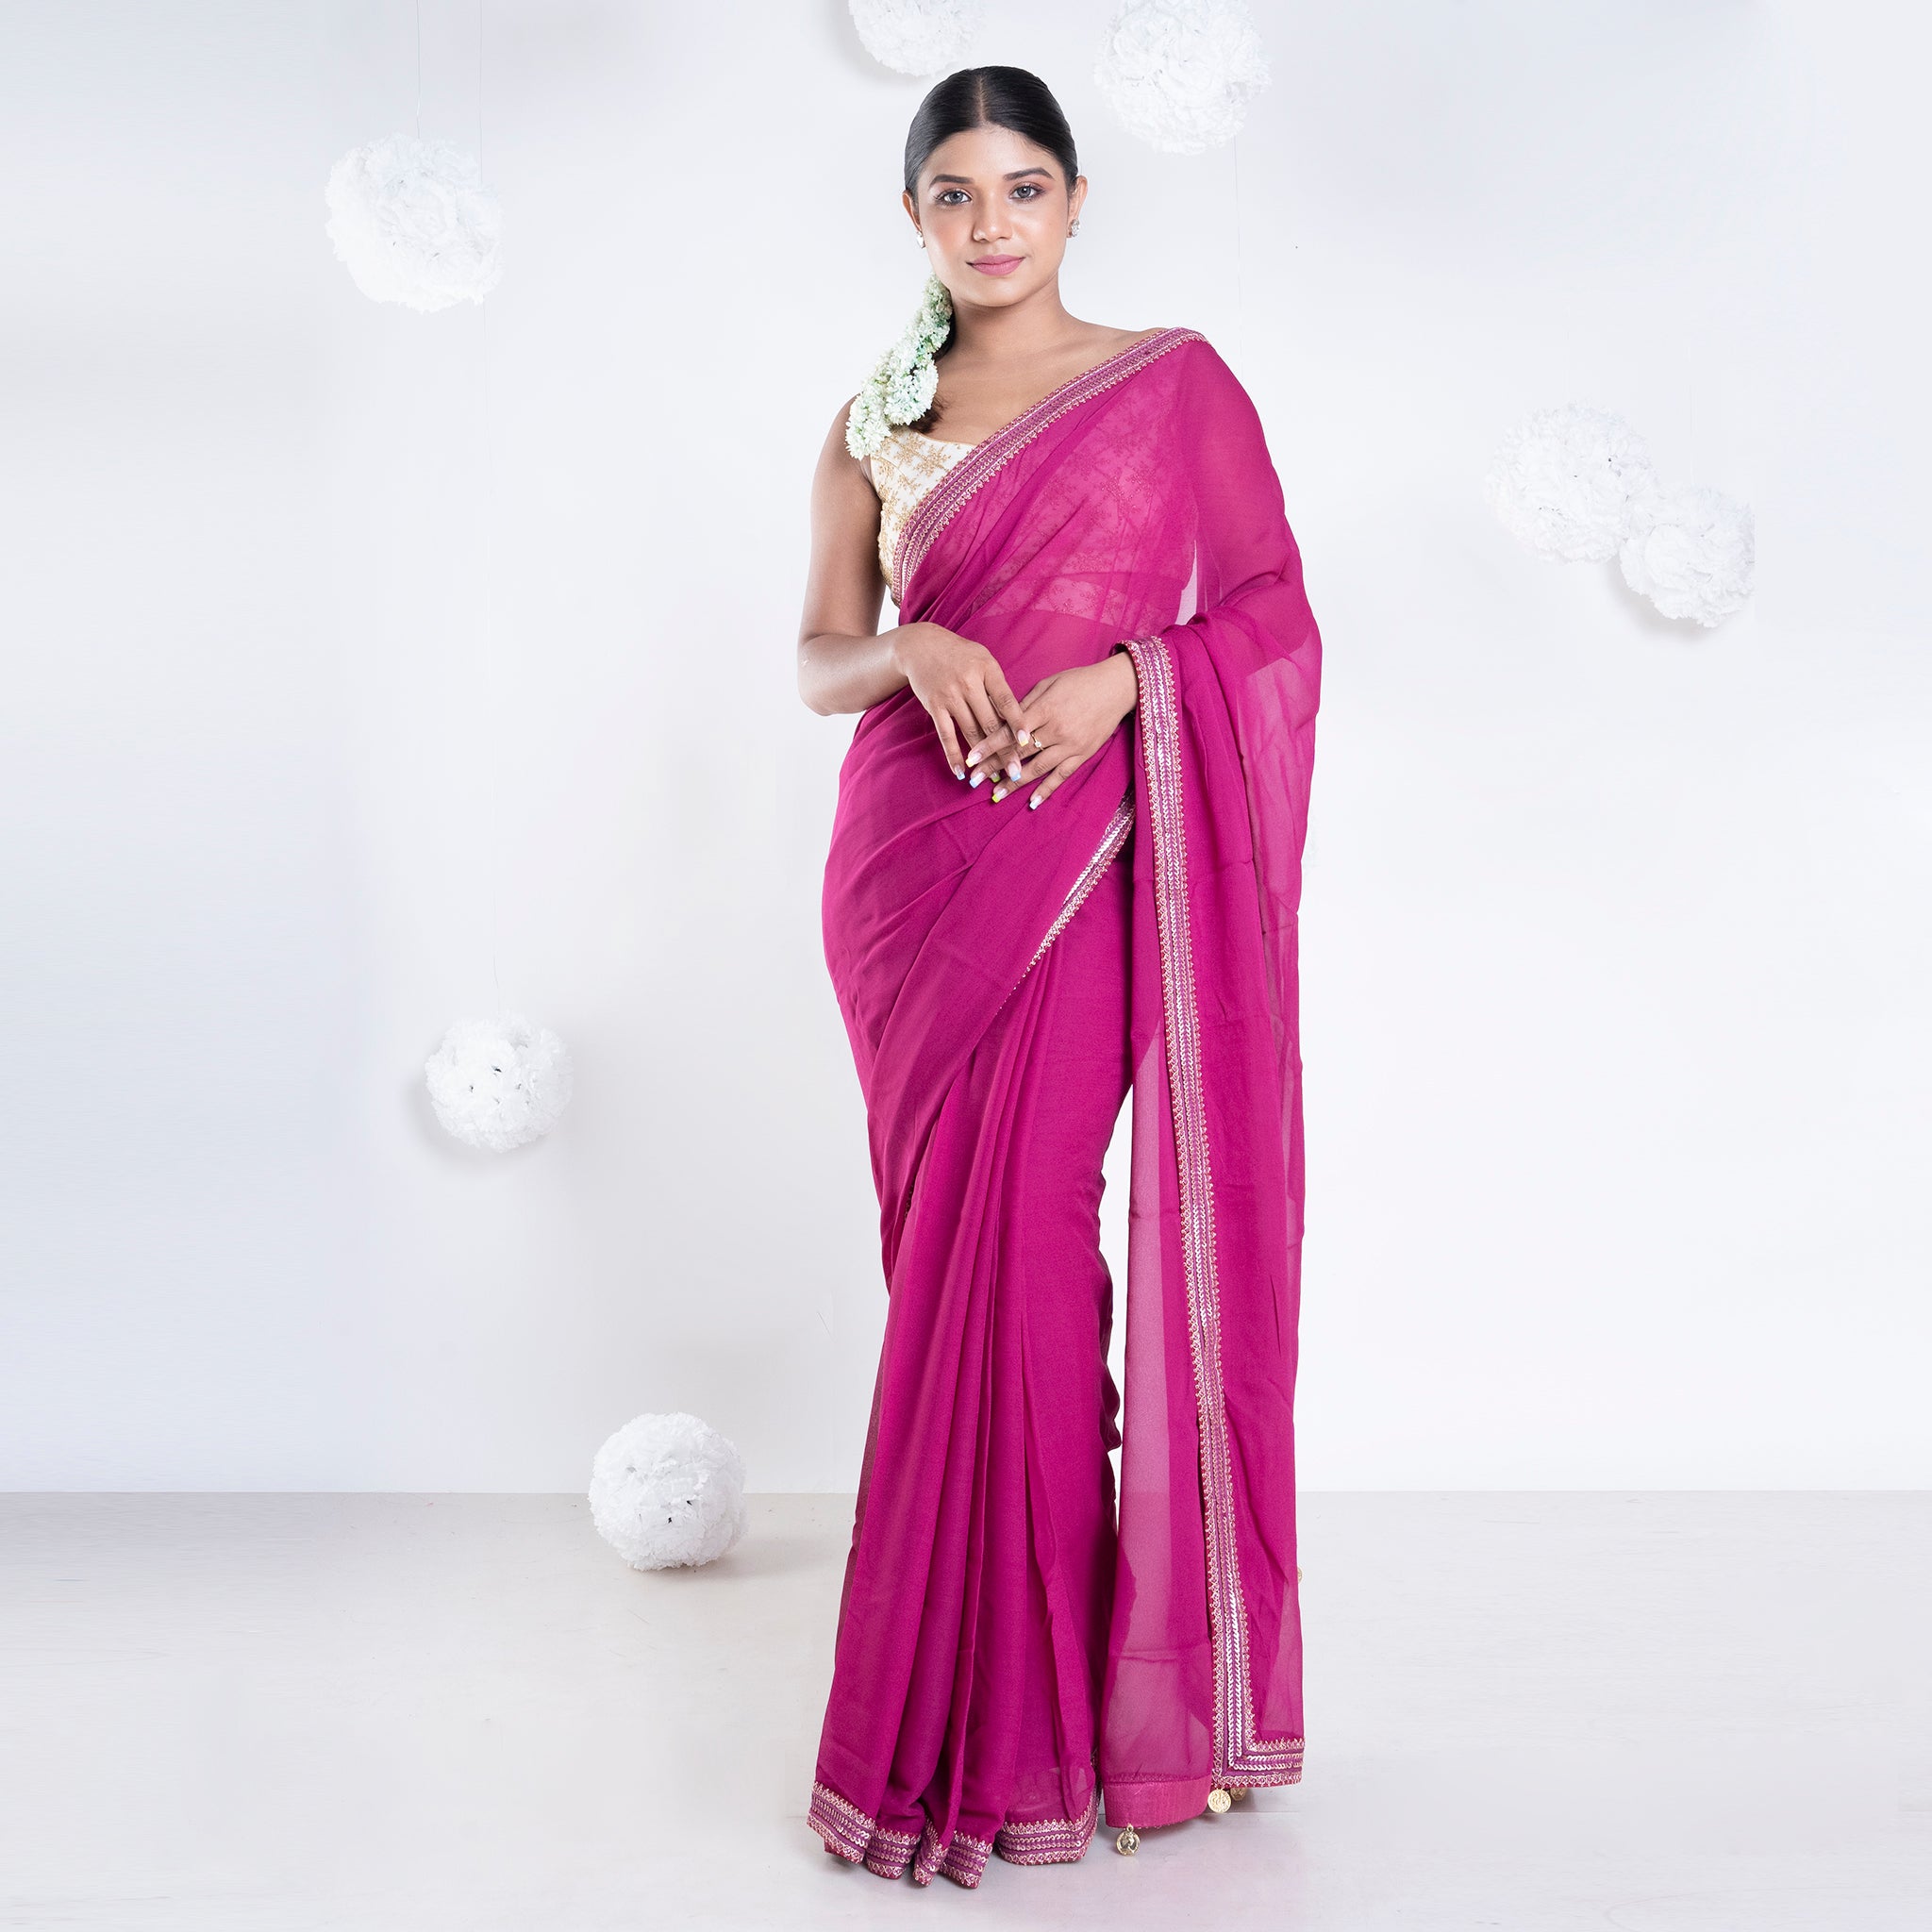 Pink Chiffon Plain Saree with Contrast Sequins Worked Lace -...